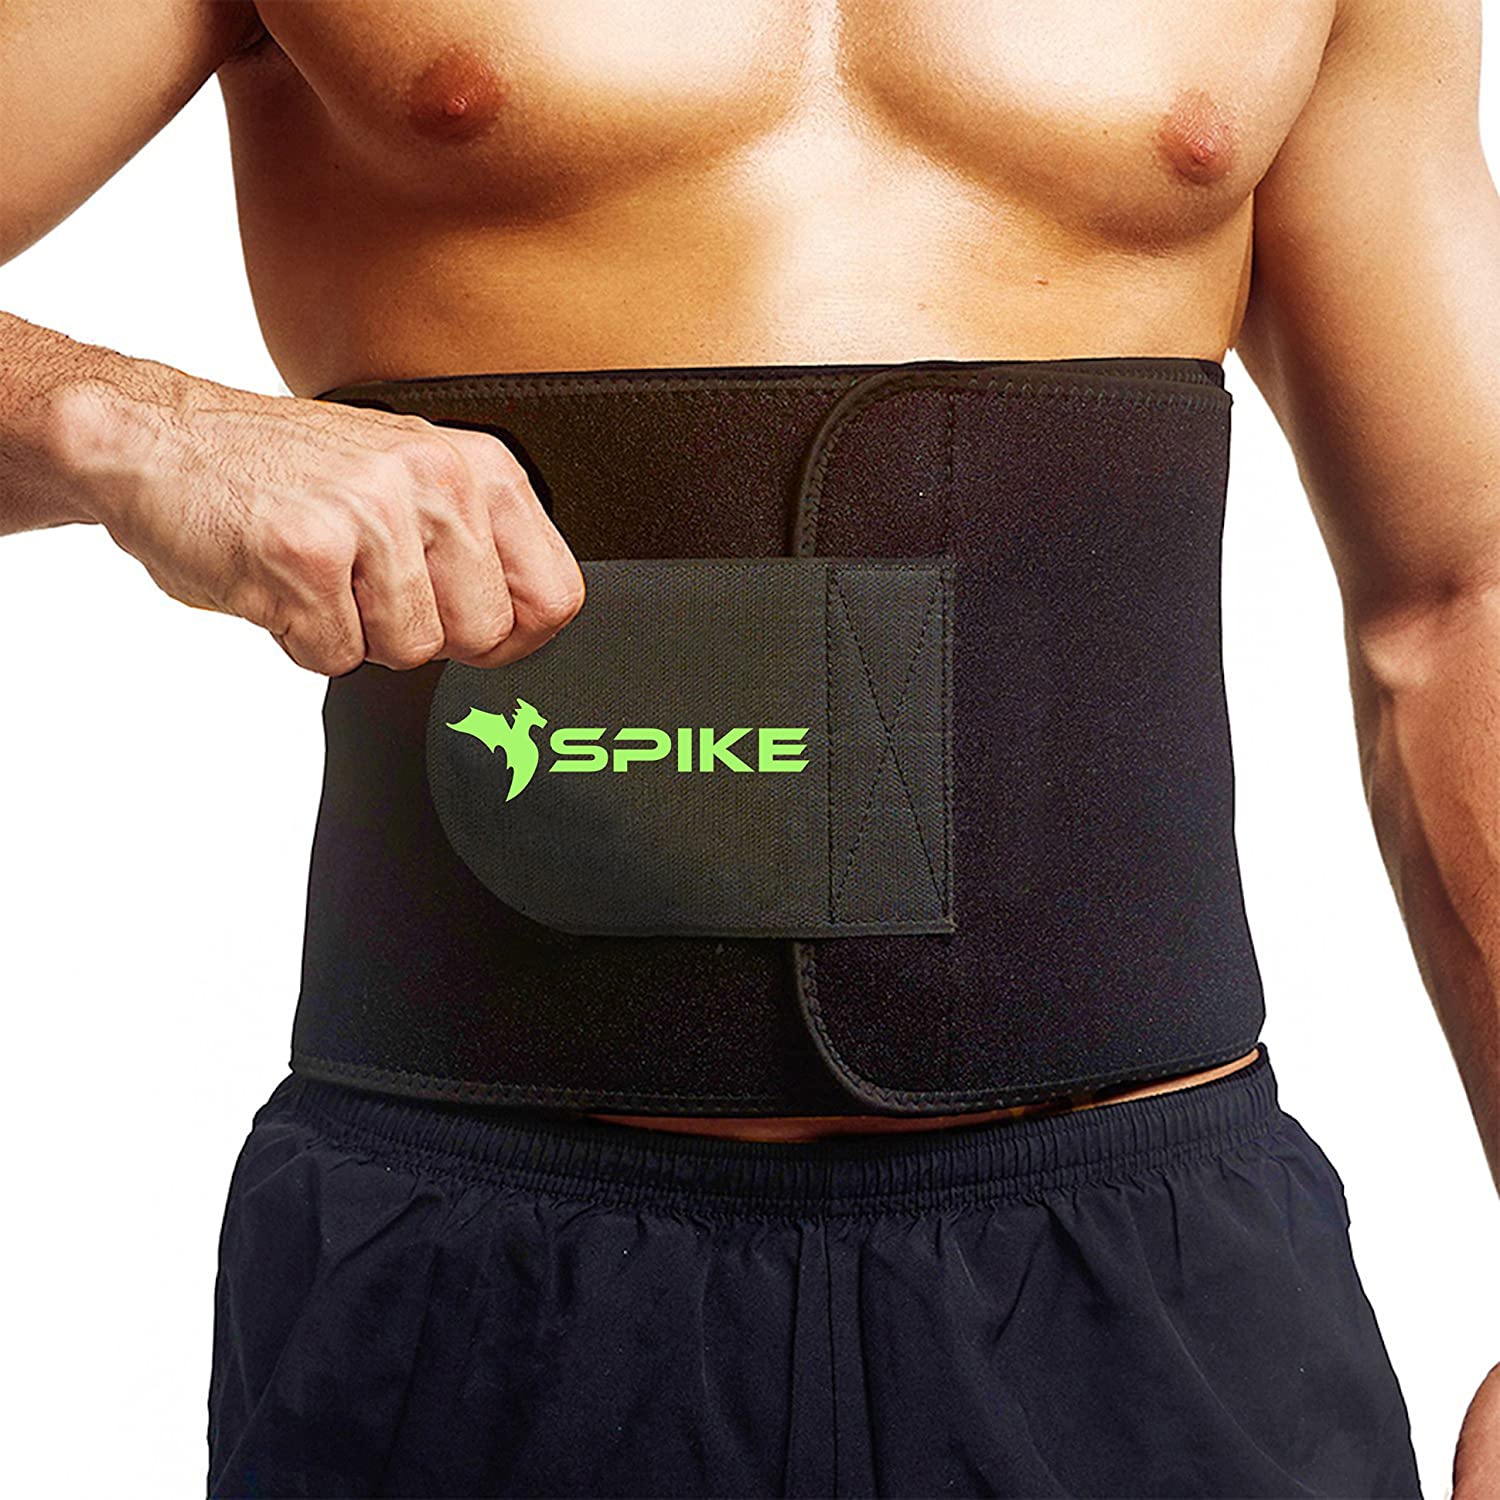 Spike Sweat Slim Belt for Fat Loss, Weight Loss and Tummy Trimming Exercise  for Both Men